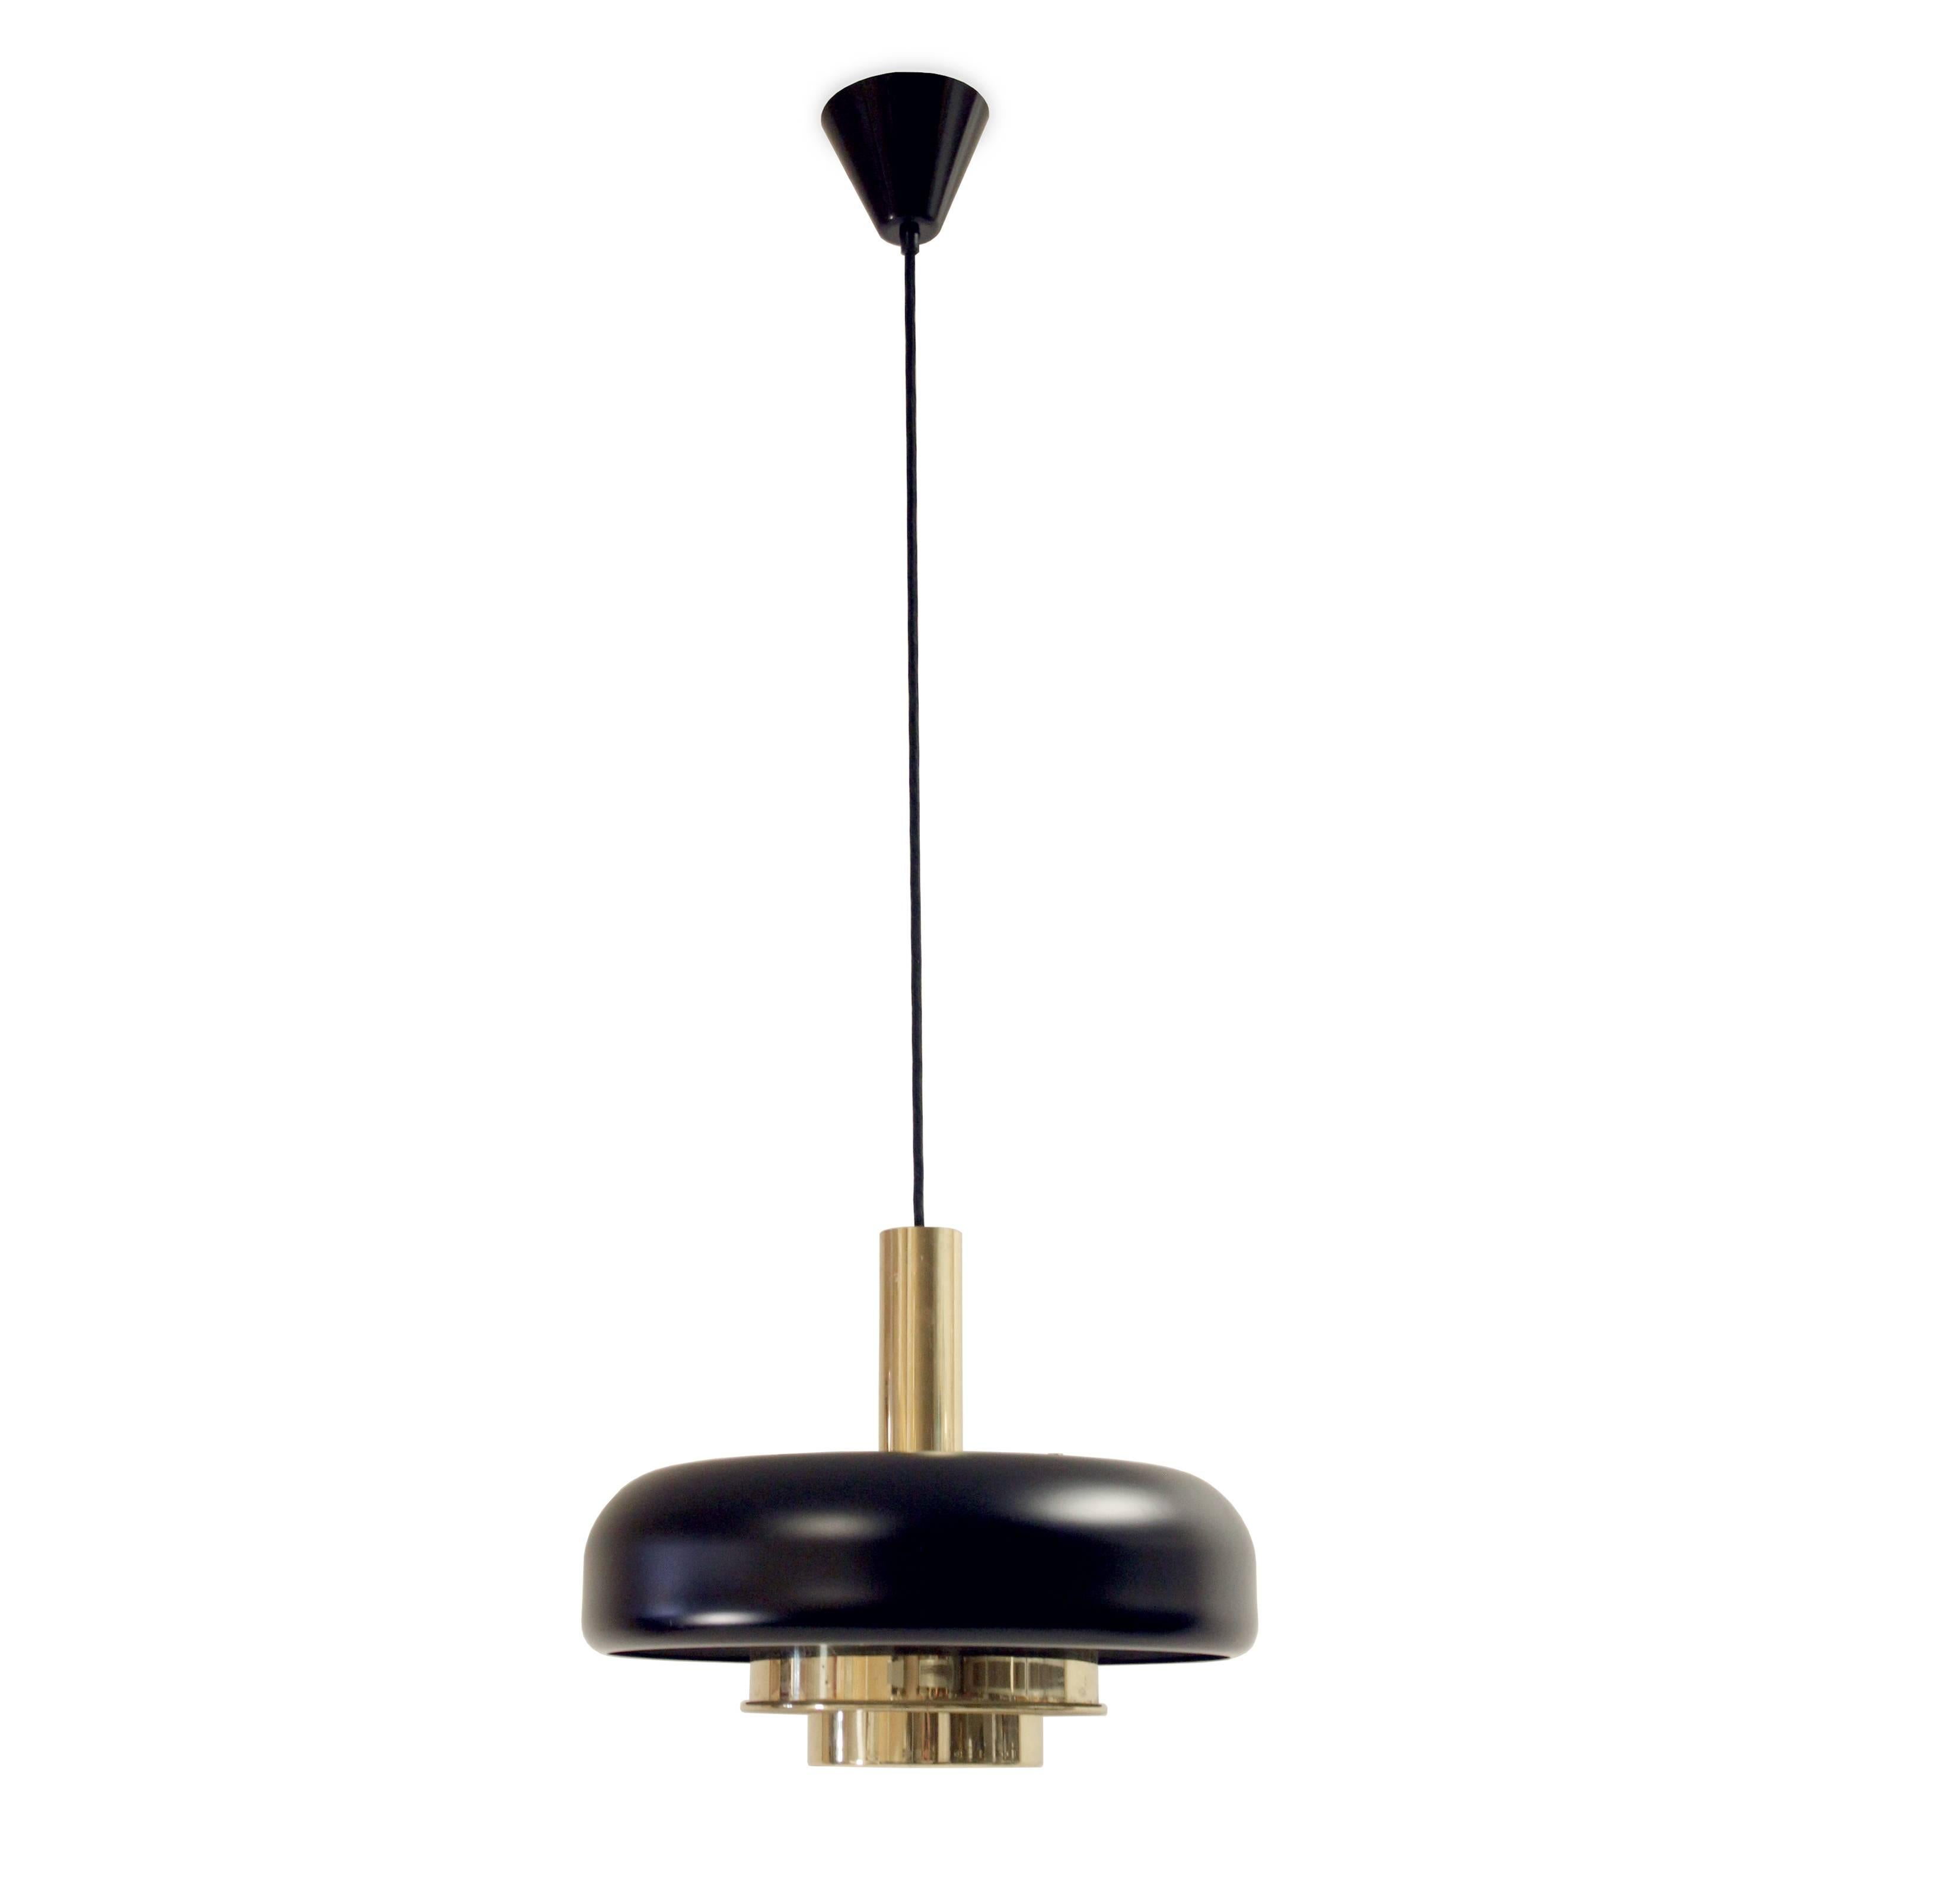 Sublime and wonderful ceiling light in lacquered steel and brass. Designed by Jonas Hidle and made in Norway by Høvik Verk from circa 1960s second half. The lamp is fully working and in excellent vintage condition.